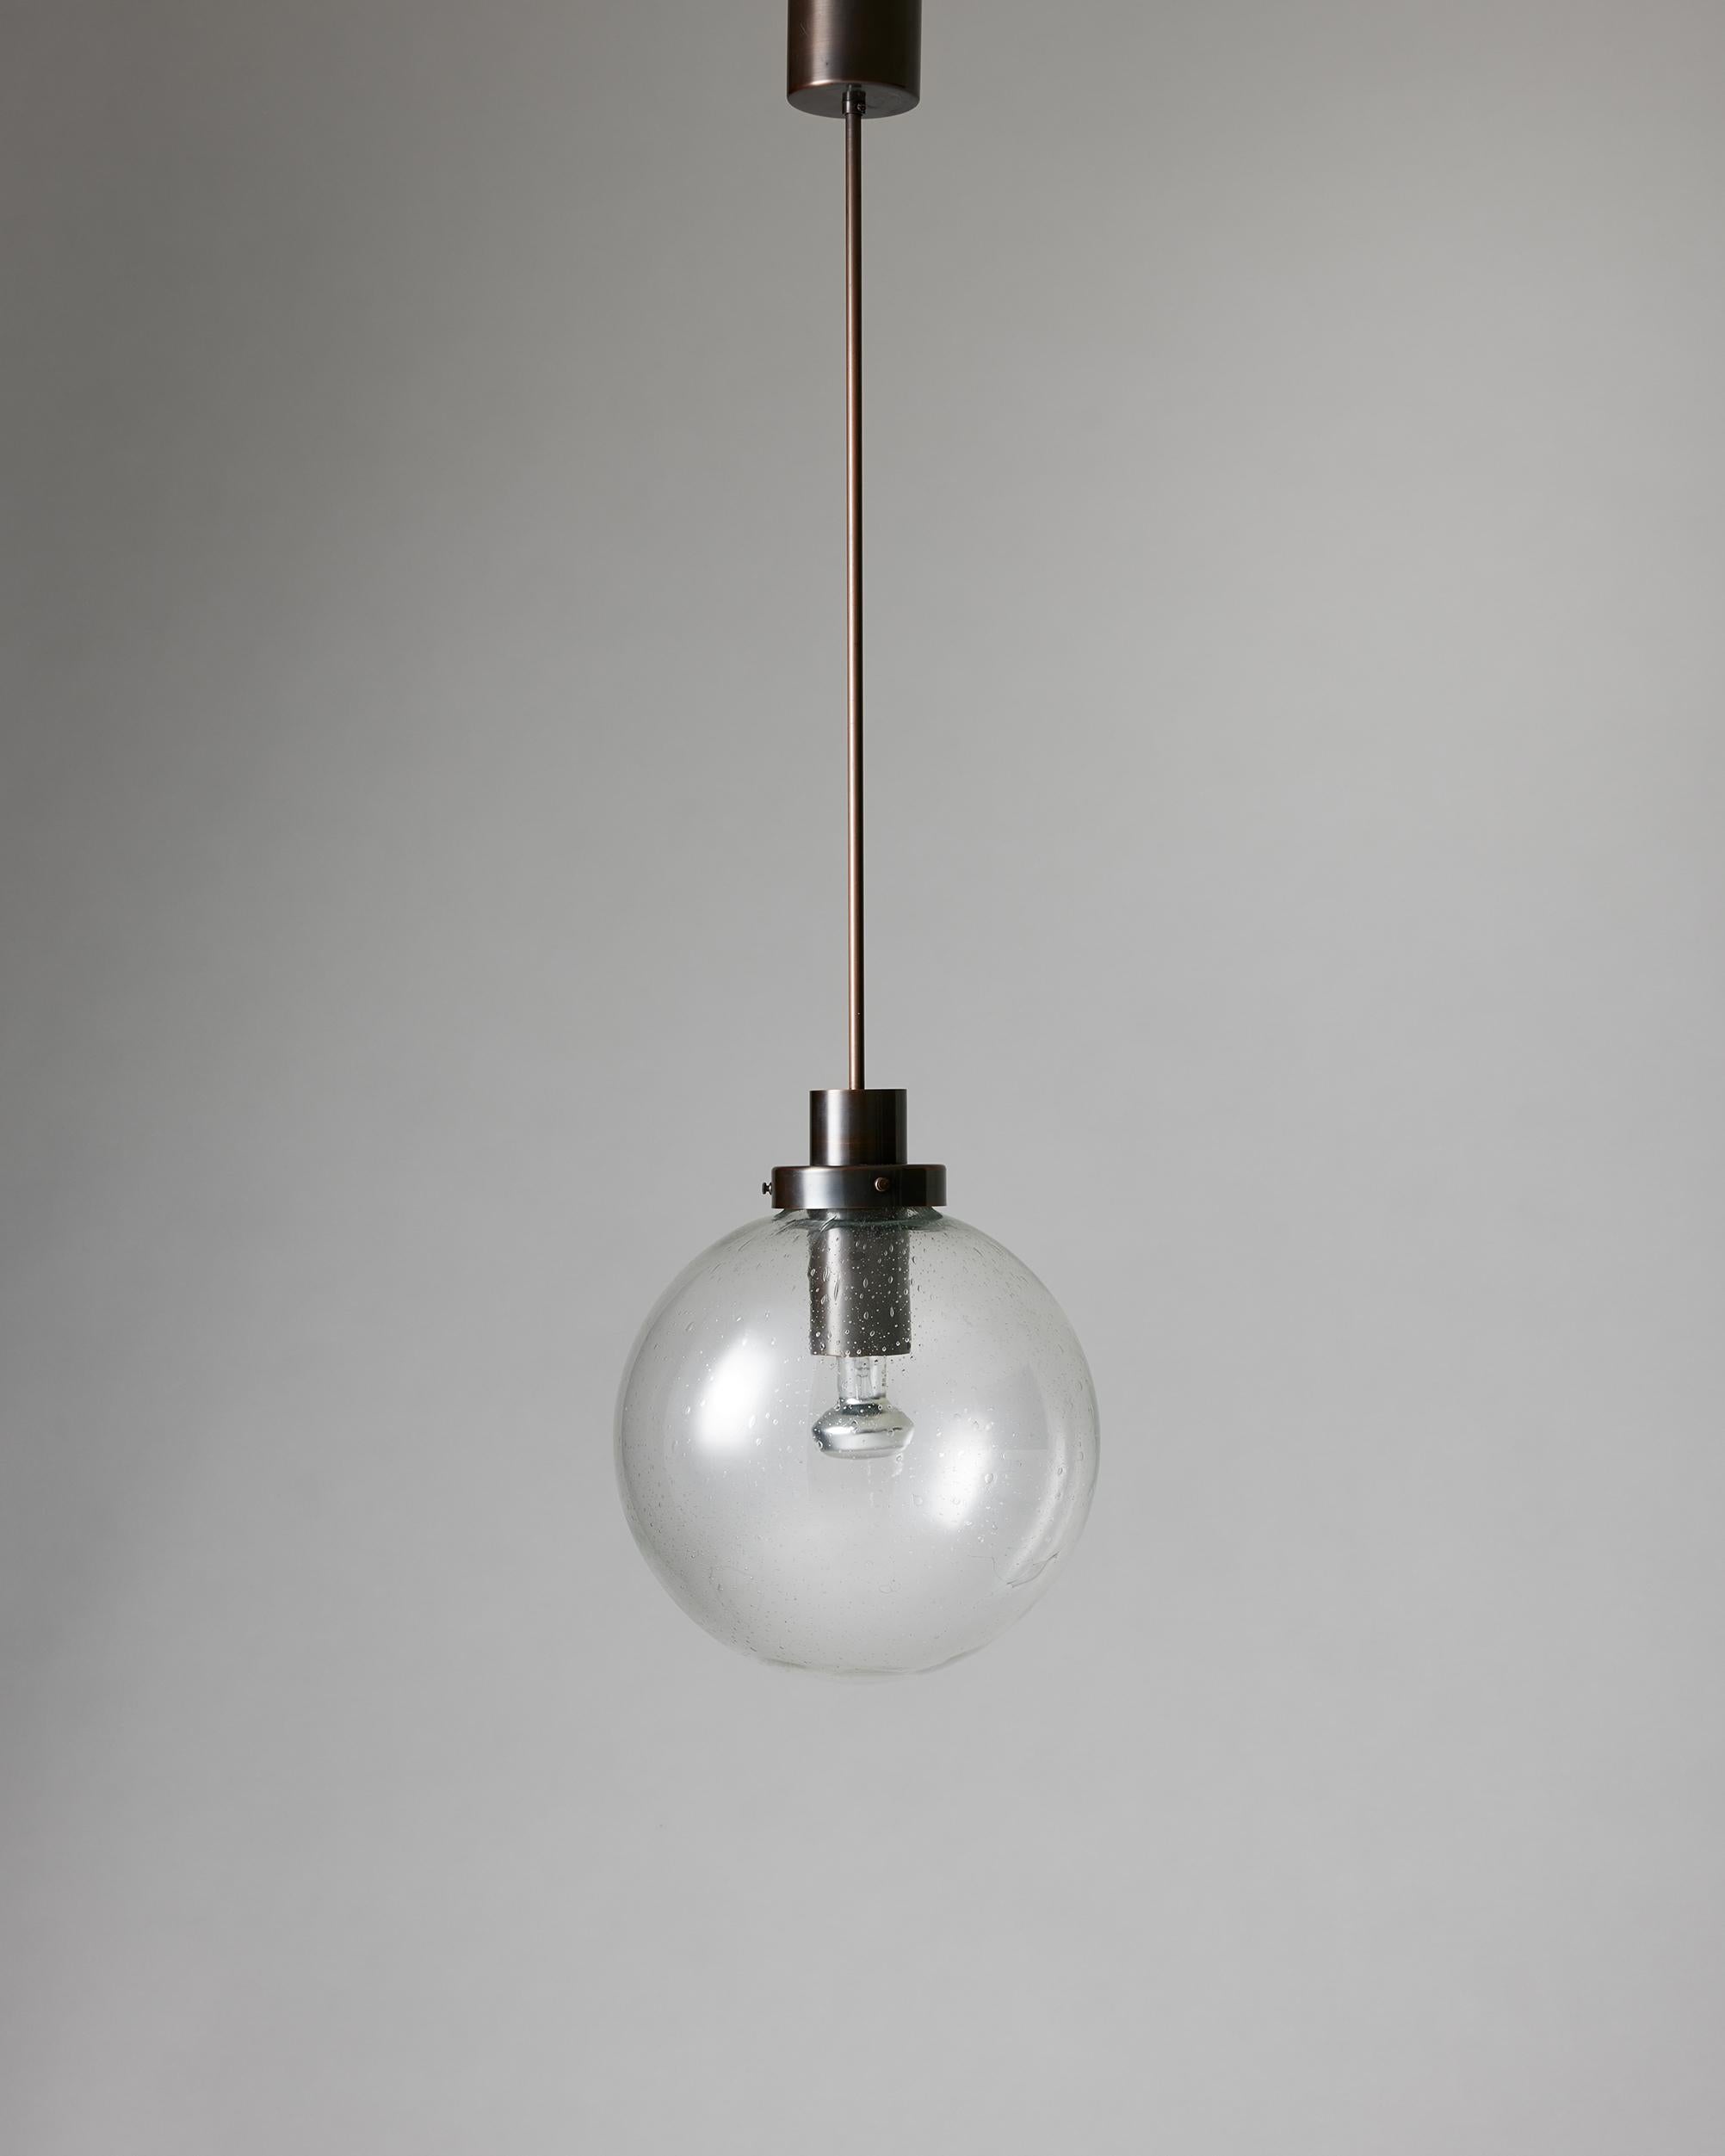 Ceiling lamp model 532 designed by Hans-Agne Jakobsson for AB Markaryd, Sweden, 1960s

Stamped.

Metal and glass.

Total height: 102 cm
Pendant height: 37 cm
Diameter: 22 cm

Active between the 1950s and 1970s—in the golden age of Scandinavian